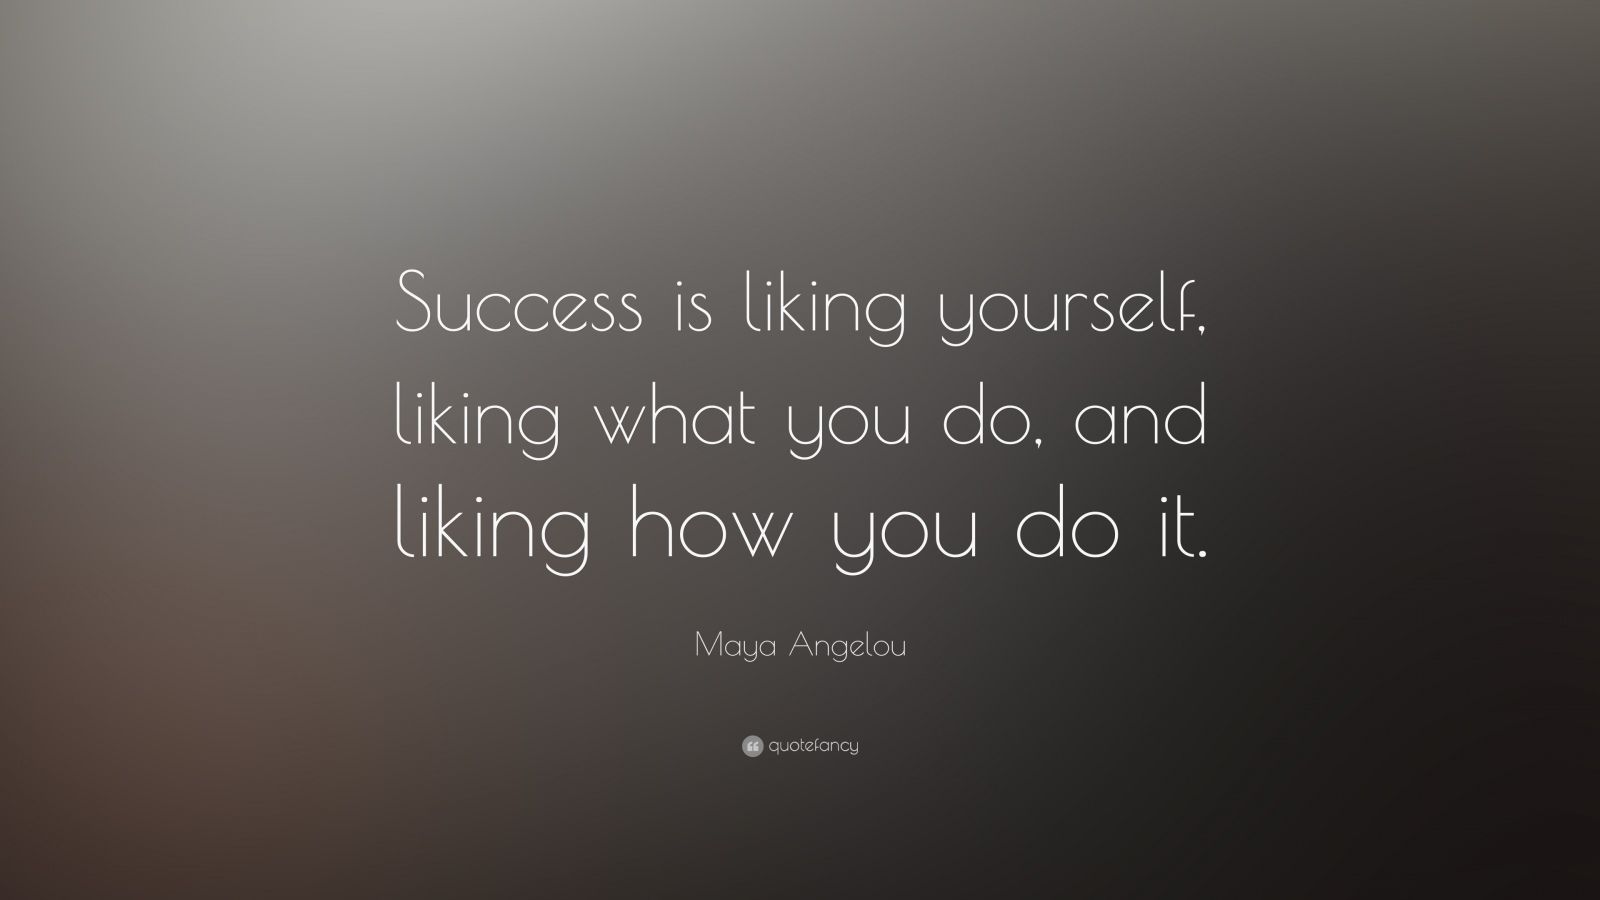 Maya Angelou Quote: “Success is liking yourself, liking what you do ...